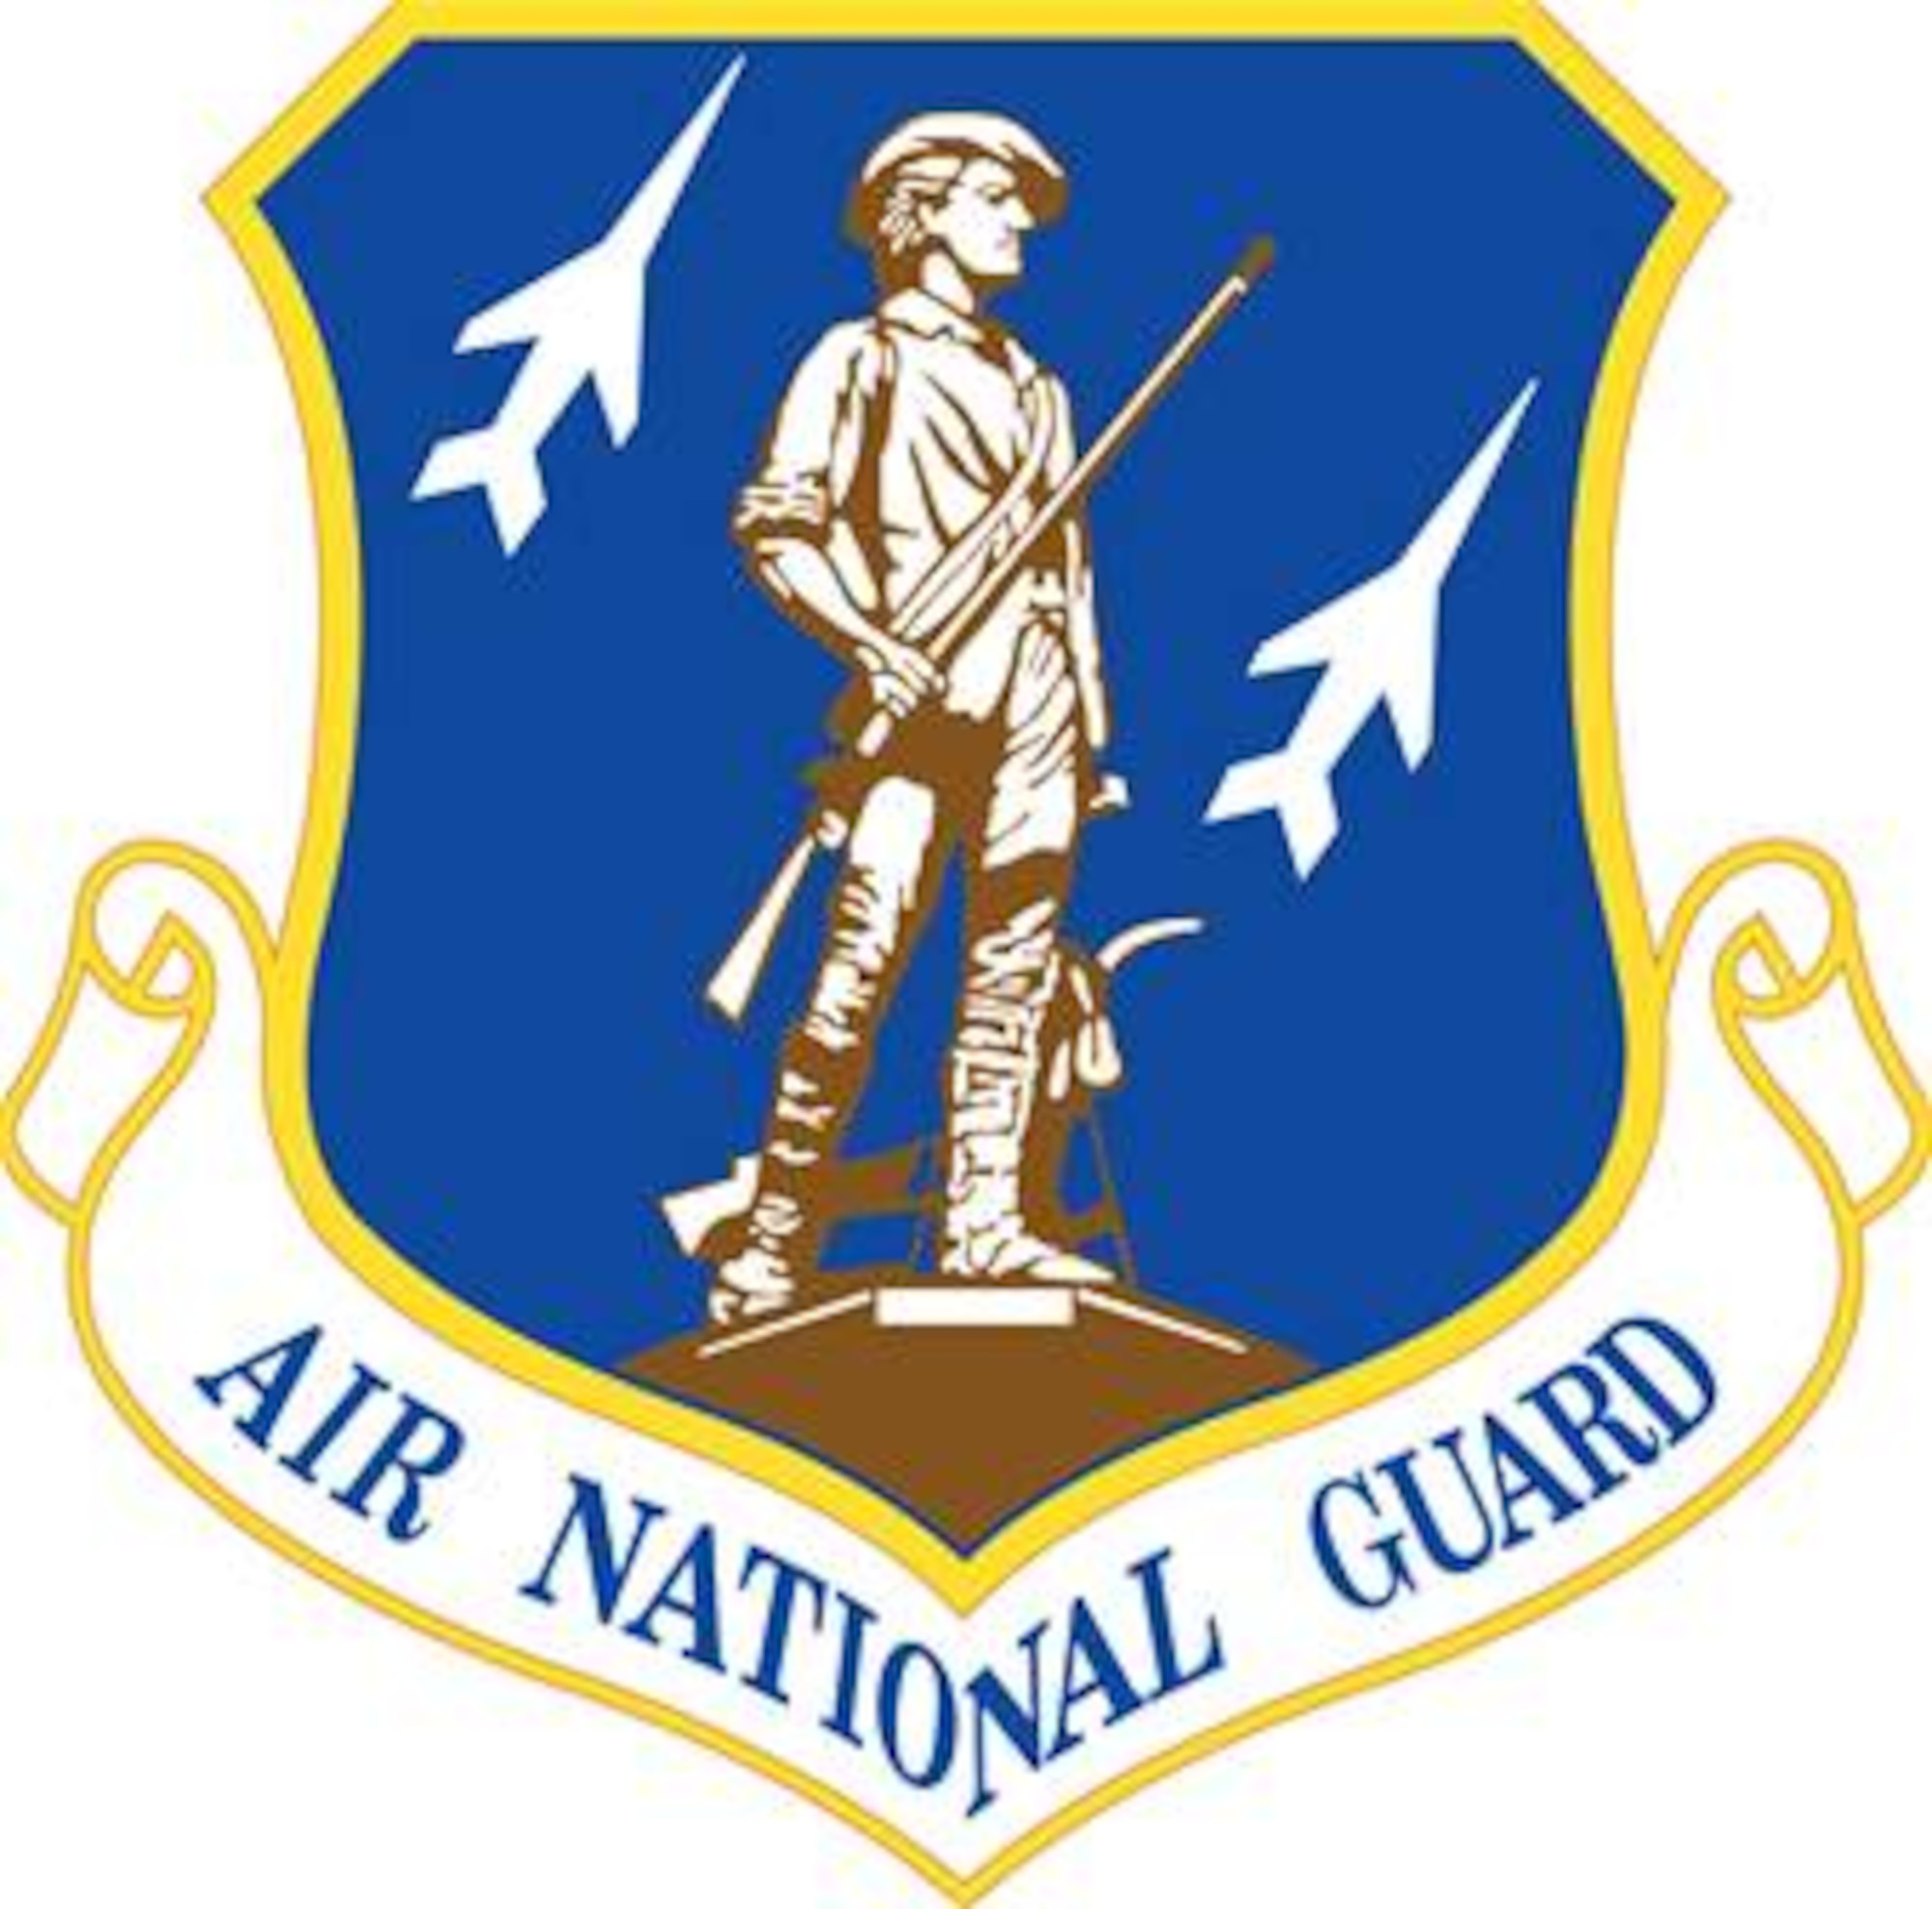 Air National Guard Seal (Color). Image is 7x7 inches @ 300ppi. Image provided by the Air Force Historical Research Agency. Department of Defense and Military Seals are protected by law from unauthorized use. These seals may NOT be used for non-official purposes. For additional information contact the appropriate proponent